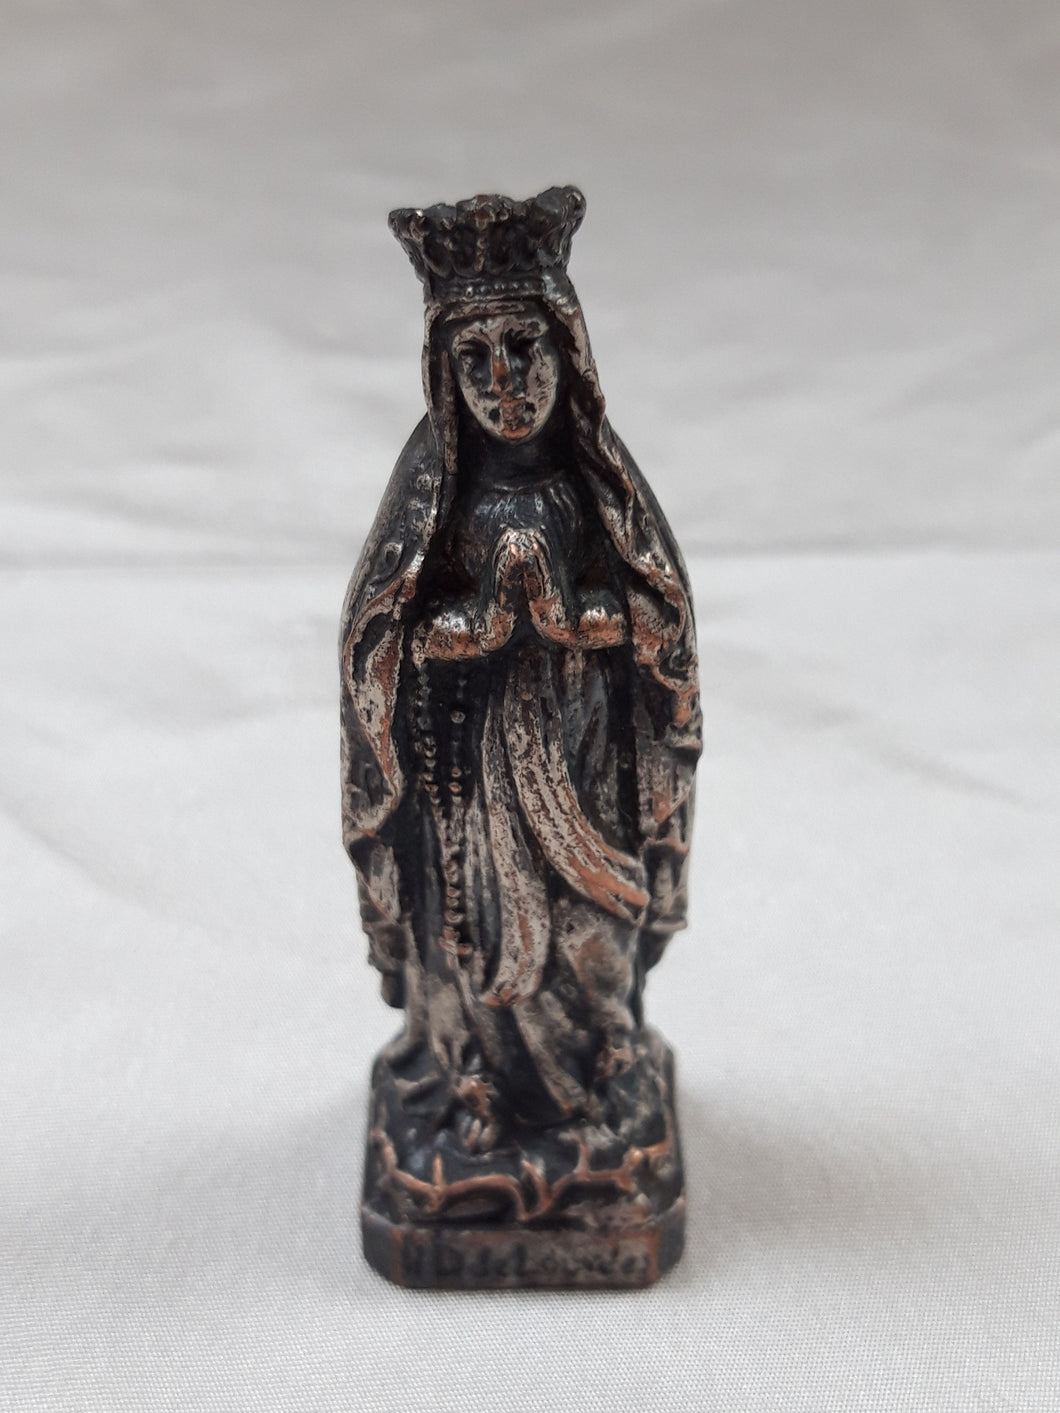 Old statuette of Our Lady of Lourdes in silver metal